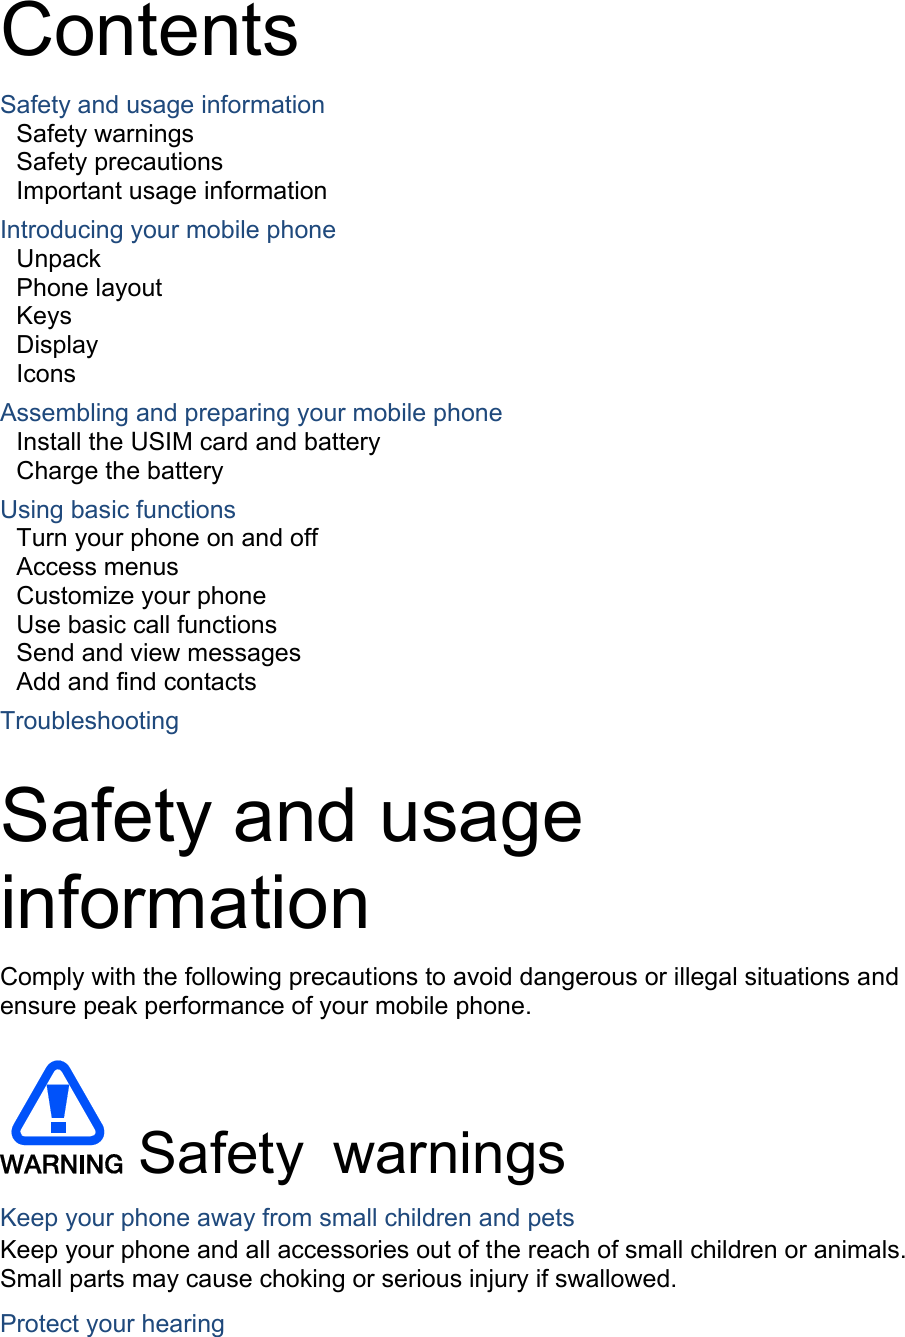  Contents Safety and usage information     Safety warnings     Safety precautions     Important usage information     Introducing your mobile phone     Unpack Phone layout     Keys  Display  Icons Assembling and preparing your mobile phone     Install the USIM card and battery     Charge the battery     Using basic functions    Turn your phone on and off    Access menus     Customize your phone     Use basic call functions     Send and view messages     Add and find contacts     Troubleshooting     Safety and usage information  Comply with the following precautions to avoid dangerous or illegal situations and ensure peak performance of your mobile phone.   Safety warnings Keep your phone away from small children and pets Keep your phone and all accessories out of the reach of small children or animals. Small parts may cause choking or serious injury if swallowed. Protect your hearing 